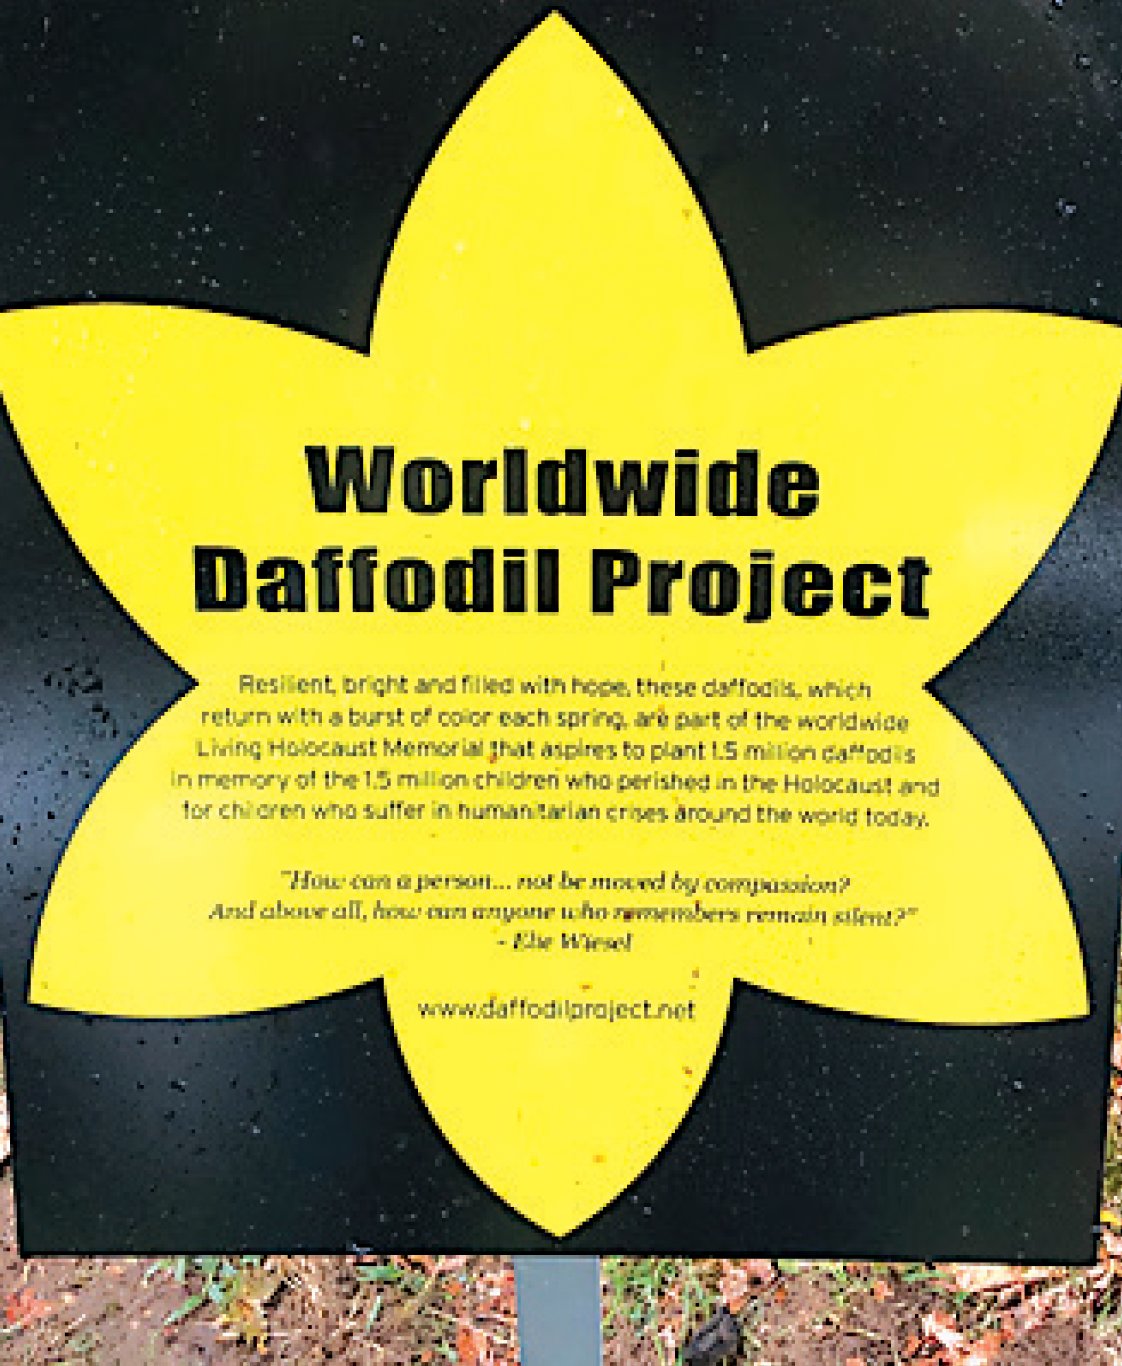 The Worldwide Daffodil Project explained.